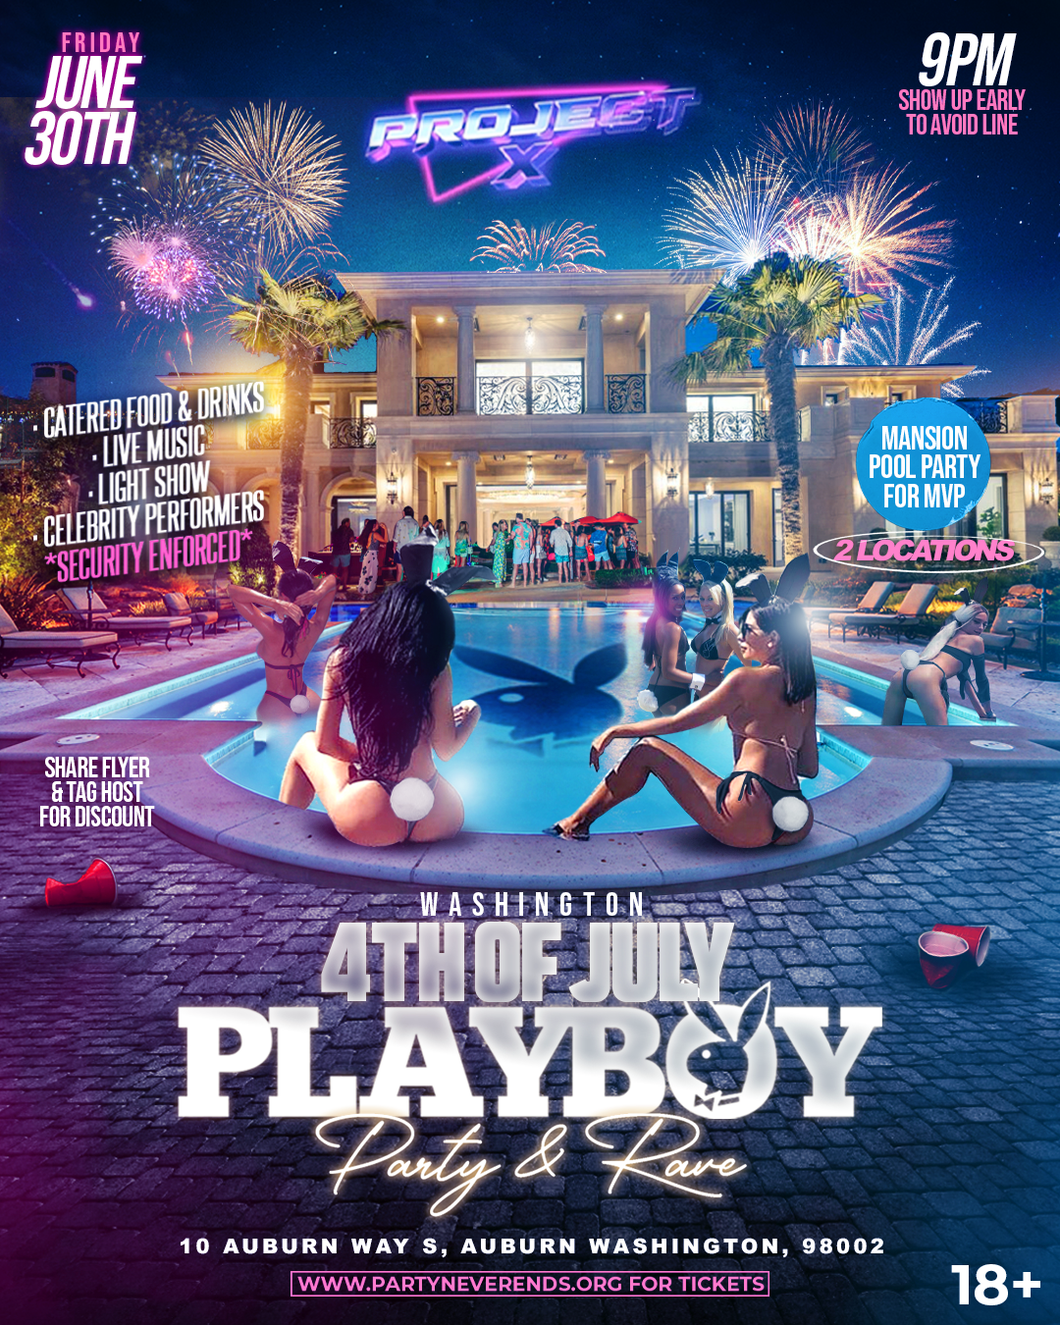 Washington 4th of July Playboy Party (Private Tables)